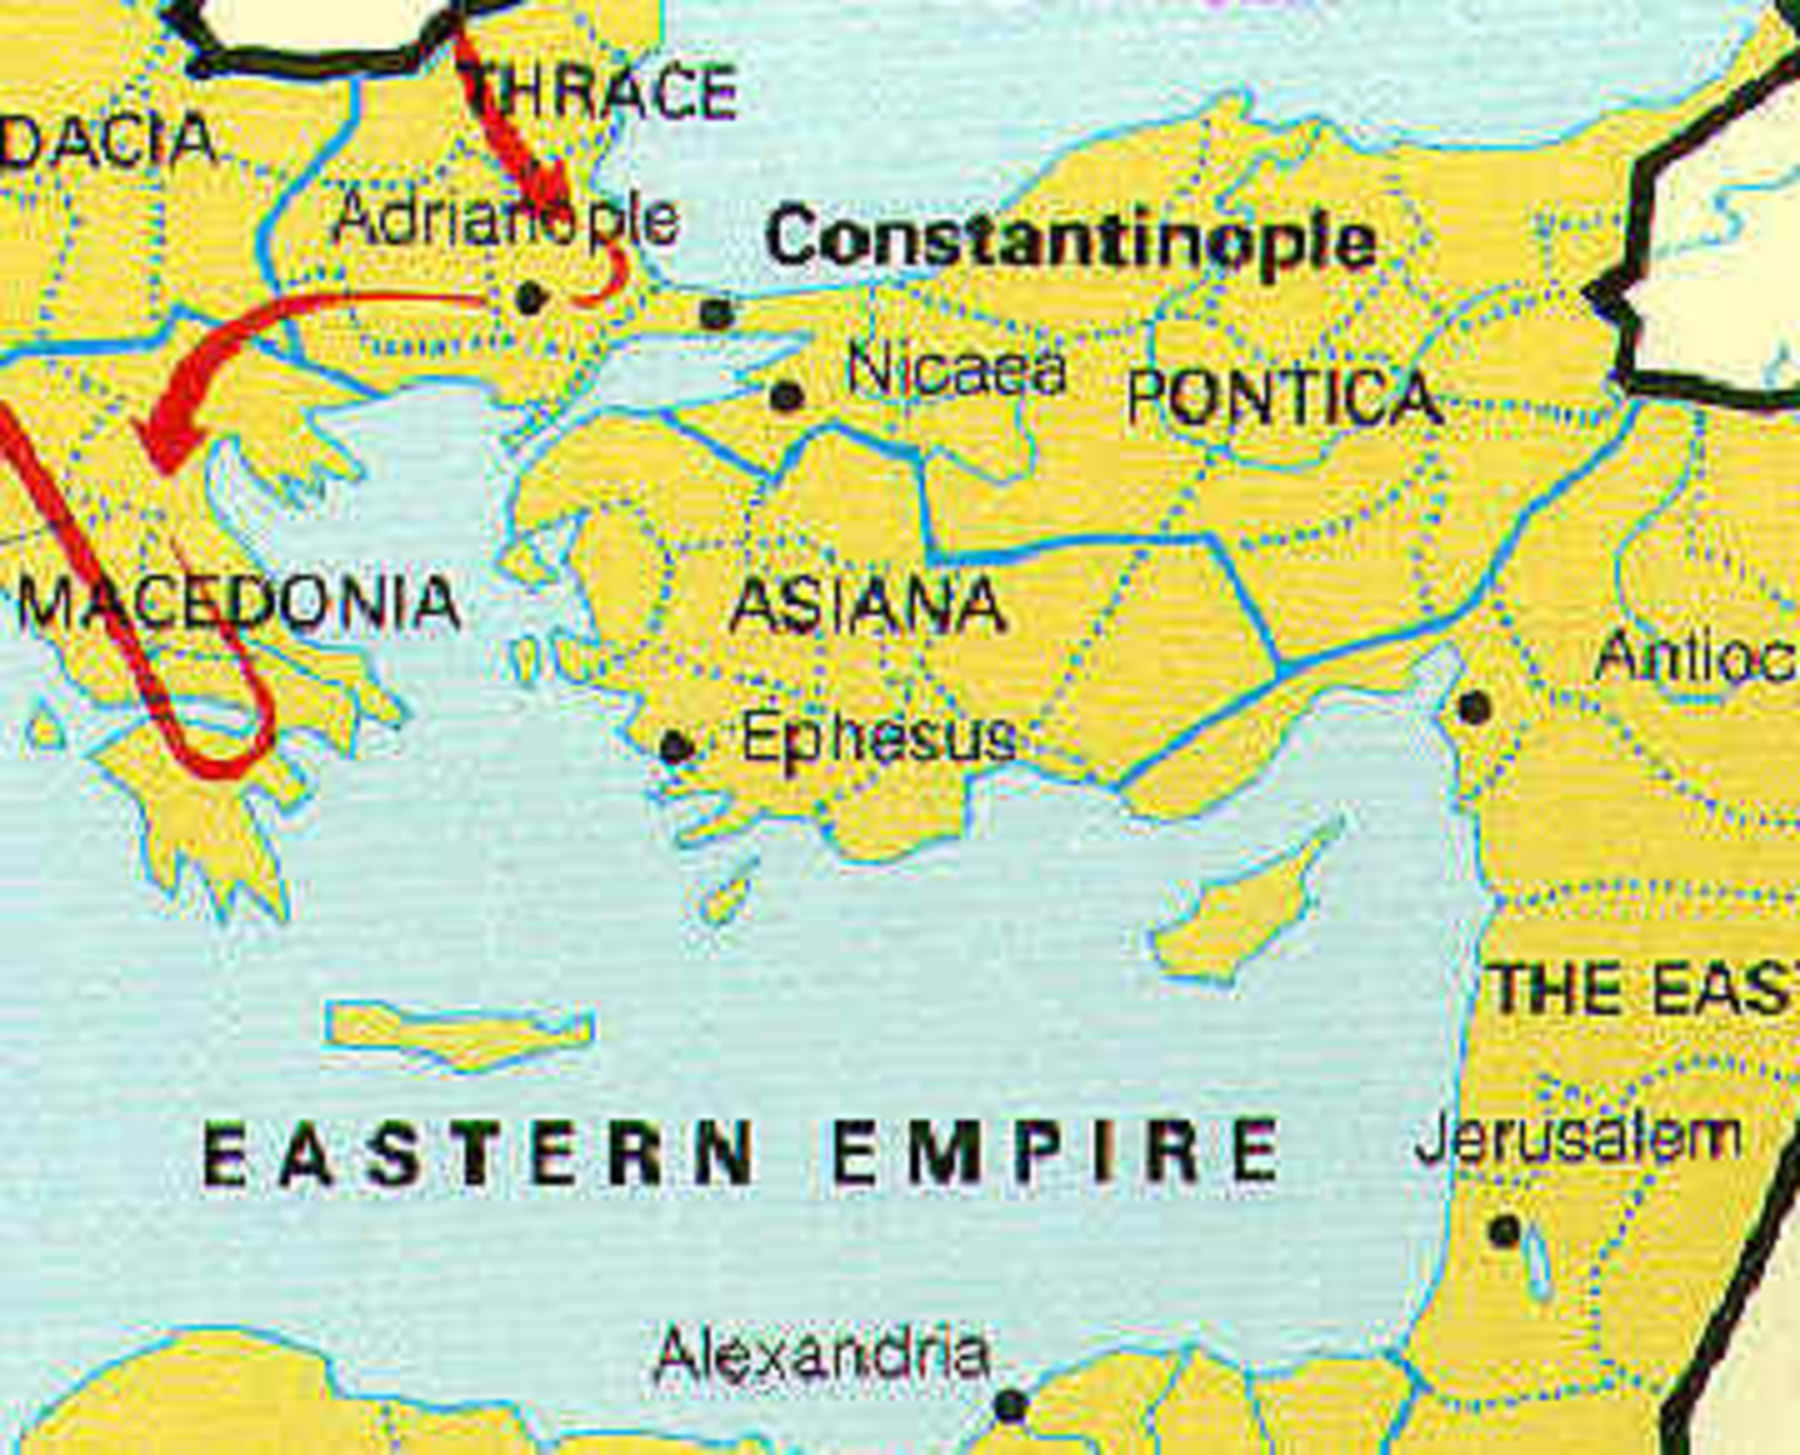 Nicea in 325 AD